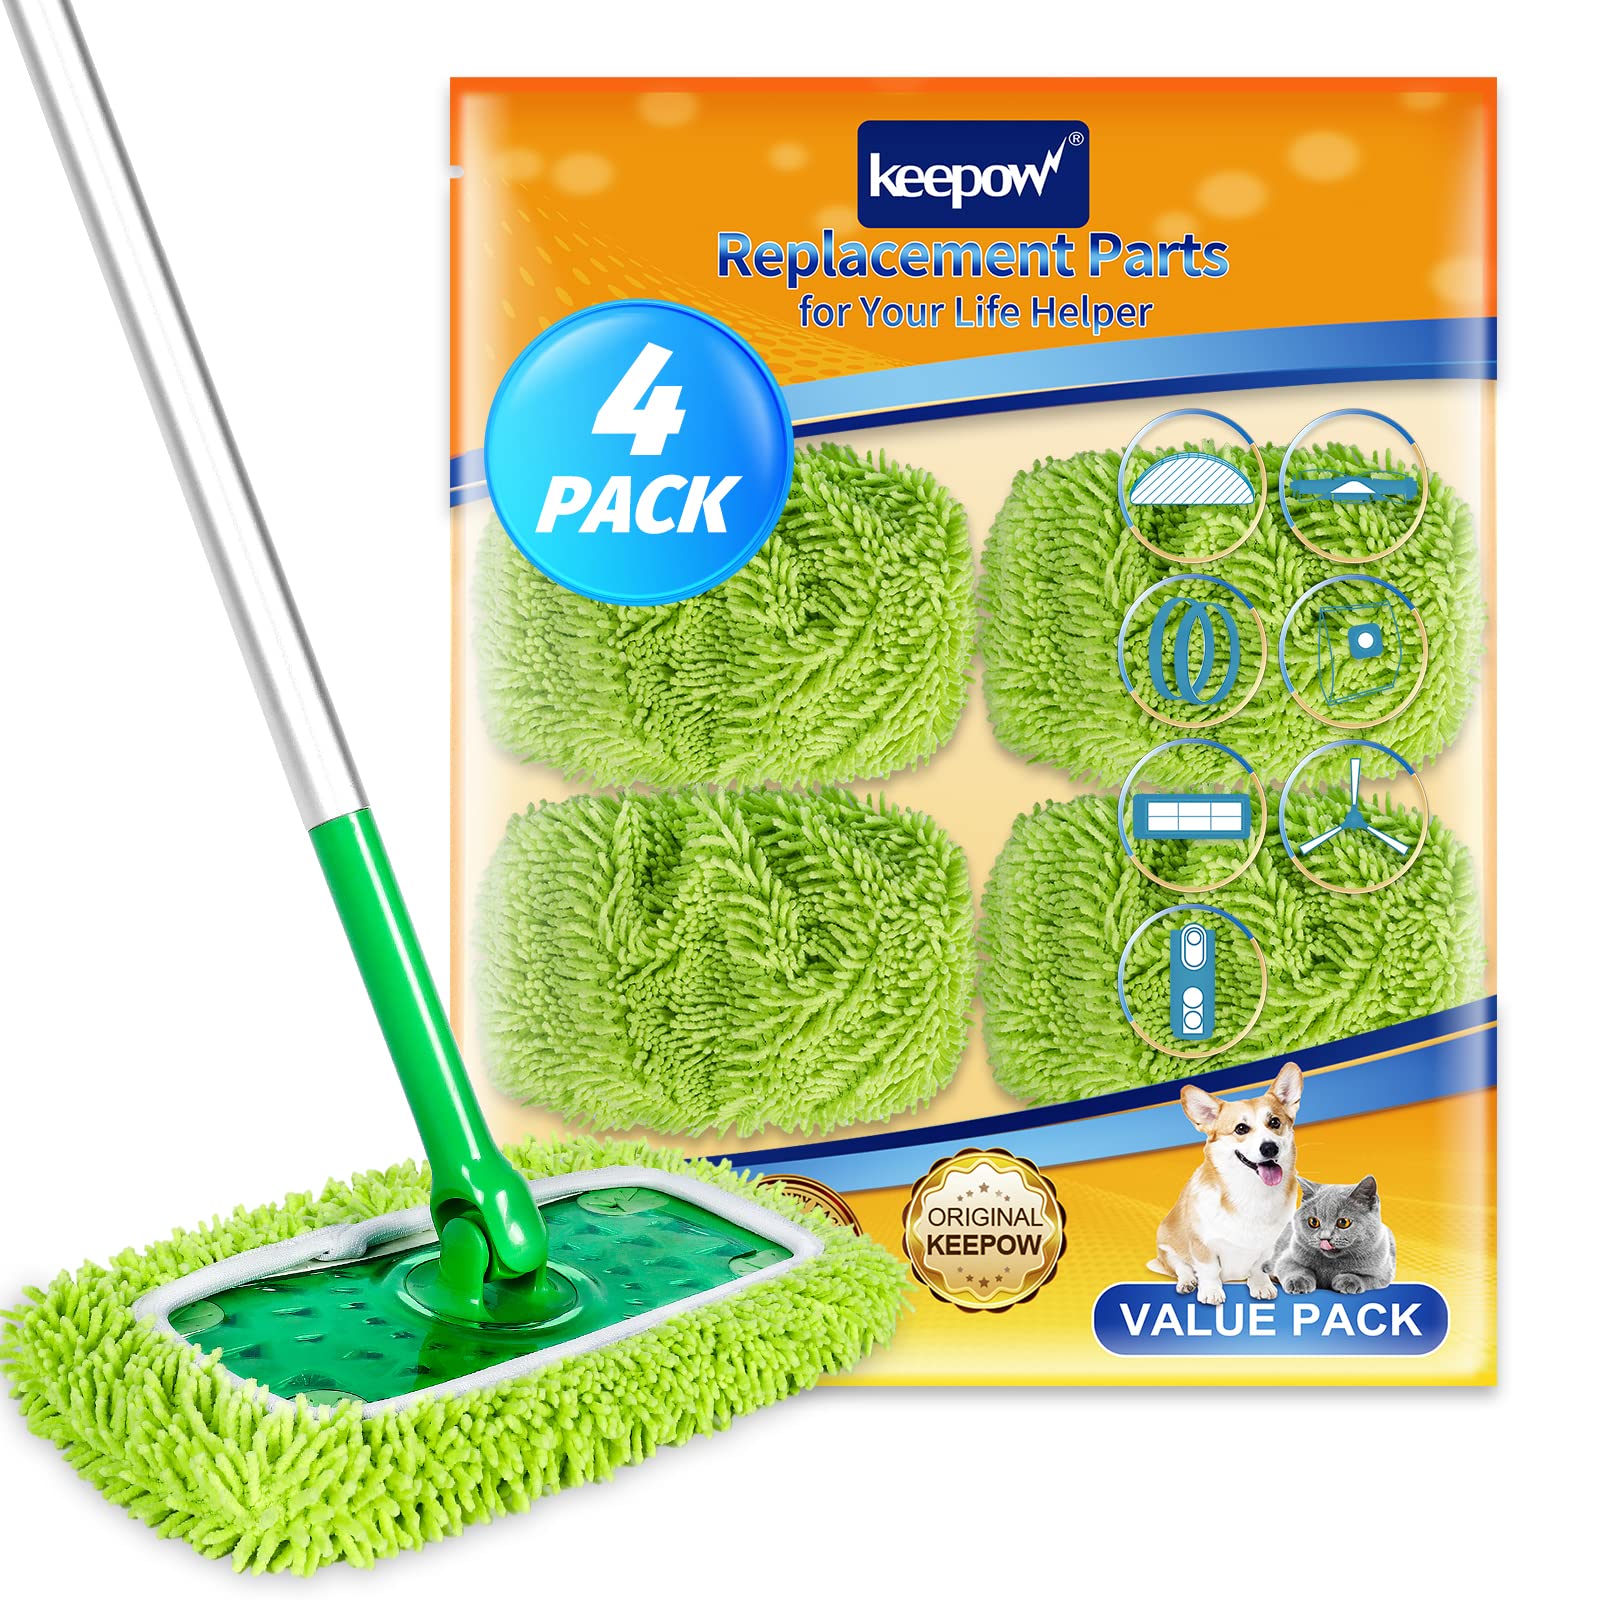 (Pack of 2) Reusable Mop Pads Refills Compatible with Swiffer Wet Jet -  Heavy Duty Microfiber Material & Washable (Green